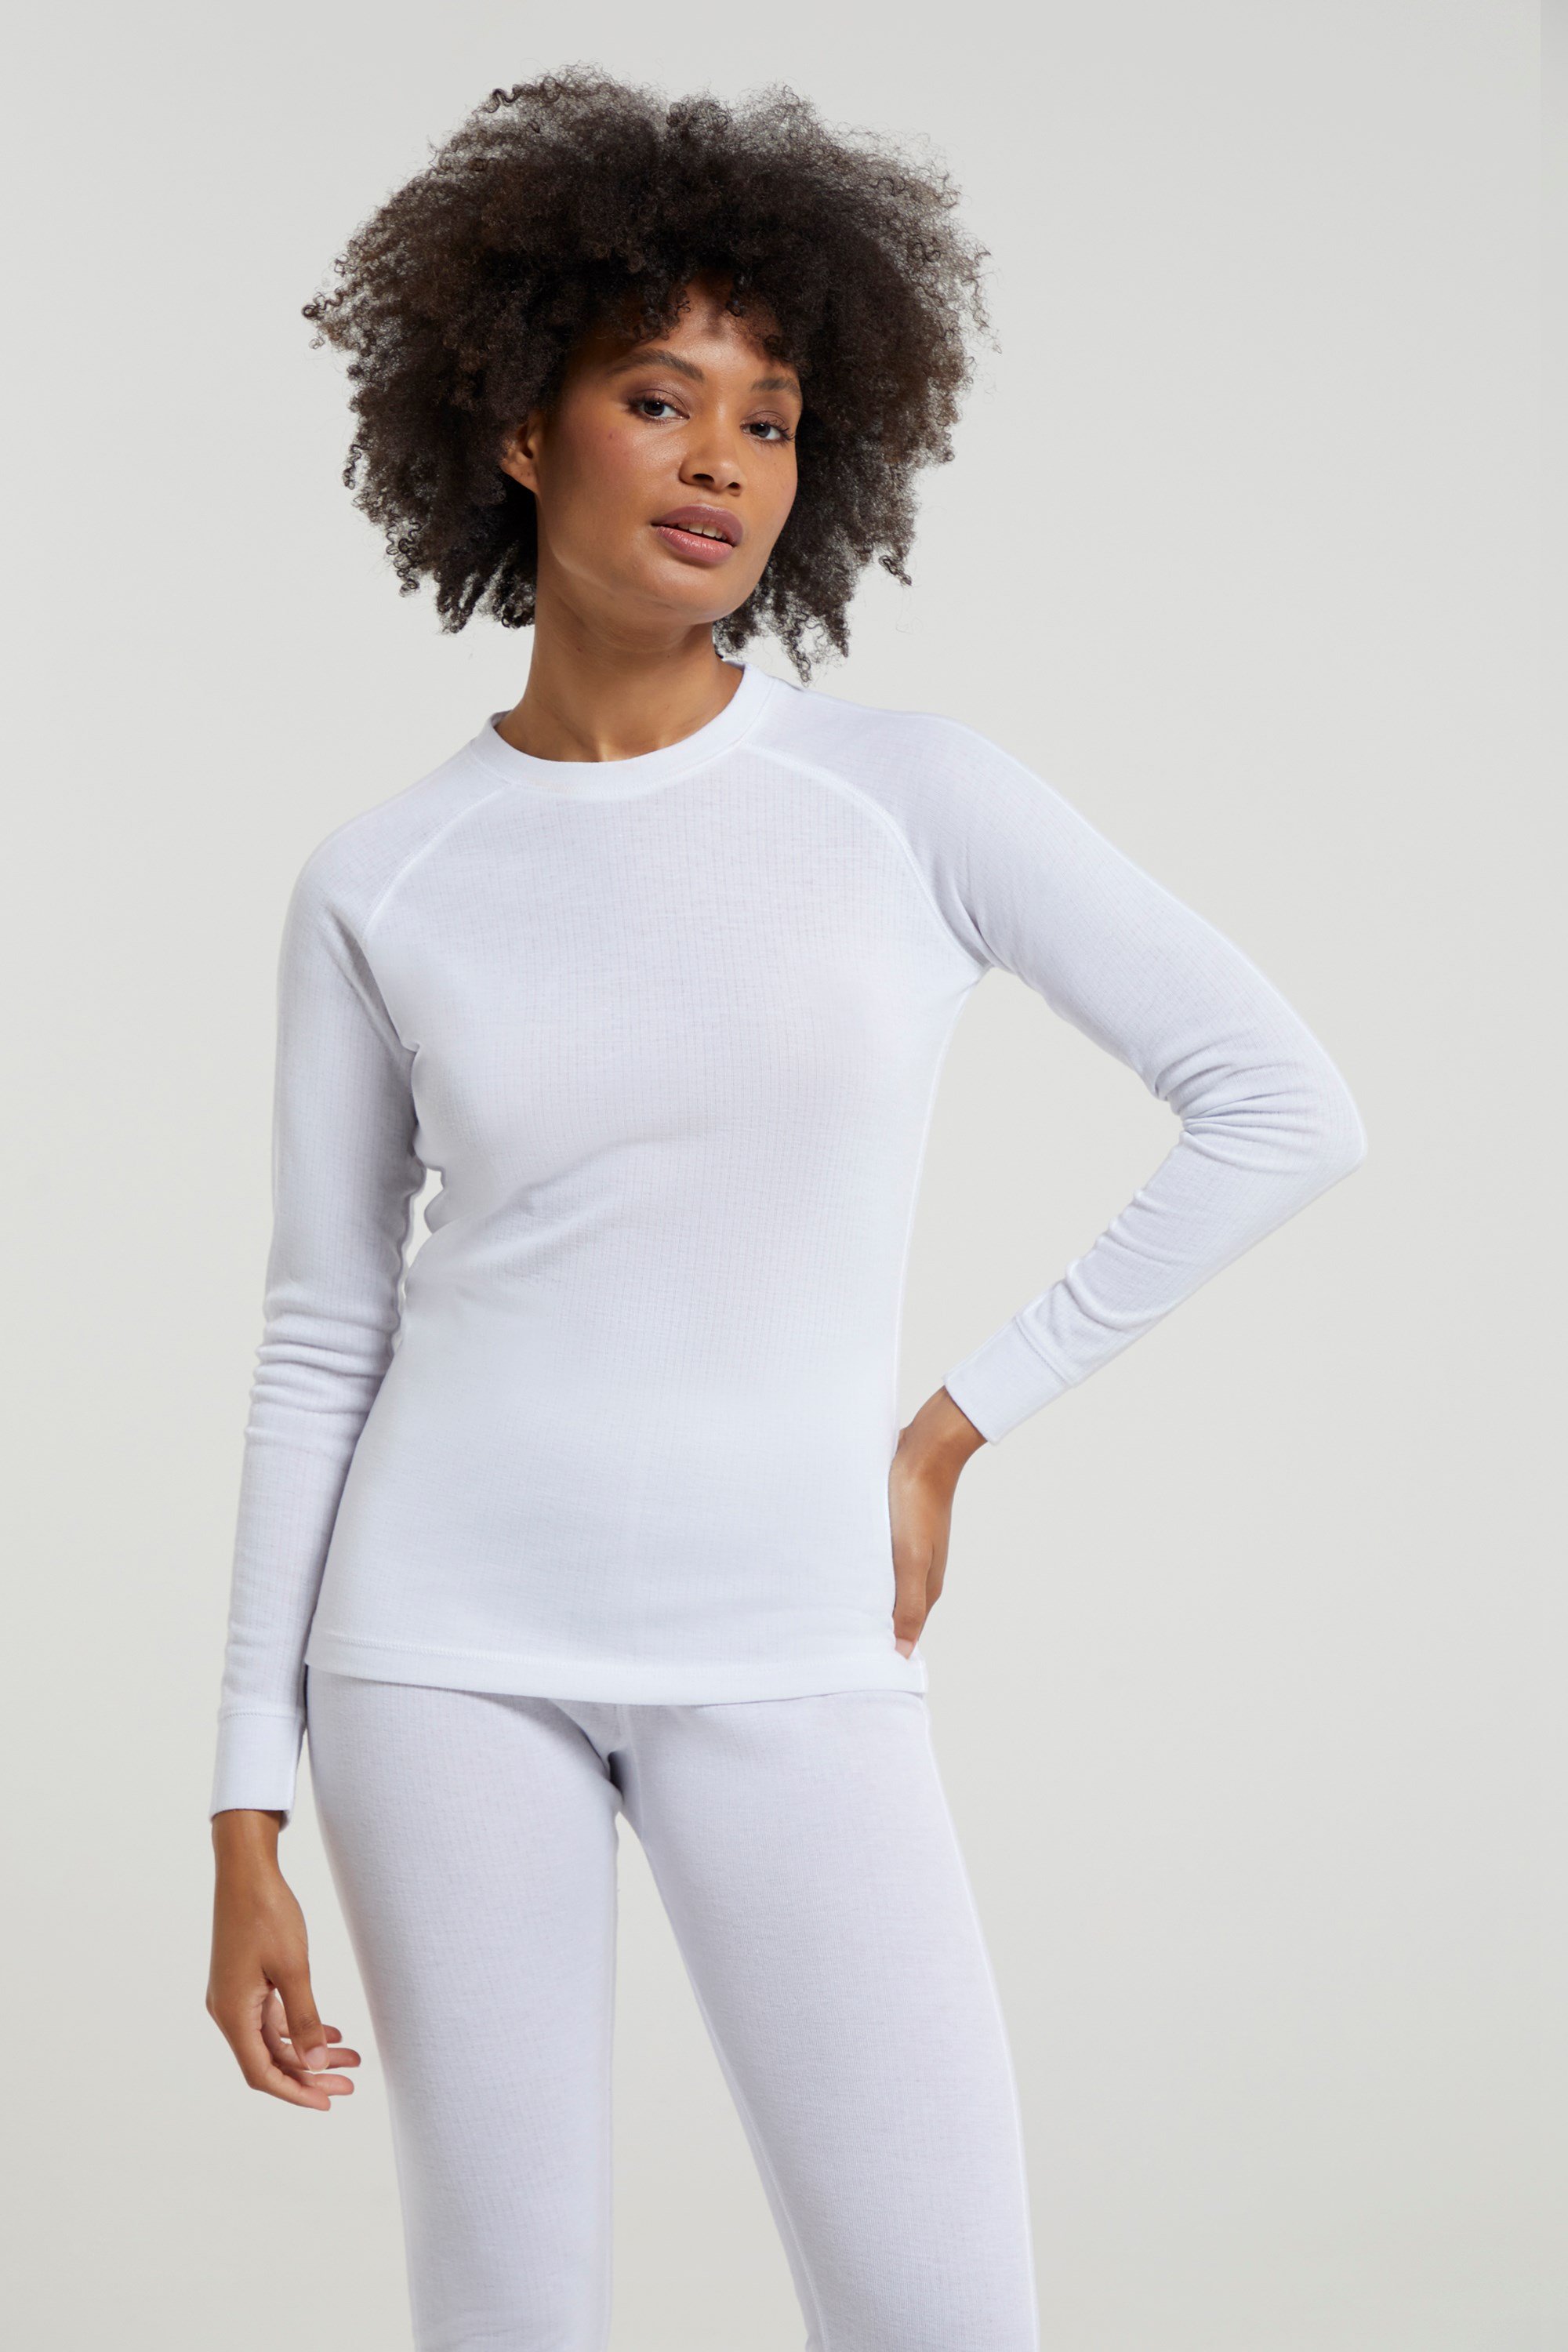 Women's Thermal Clothing NZ